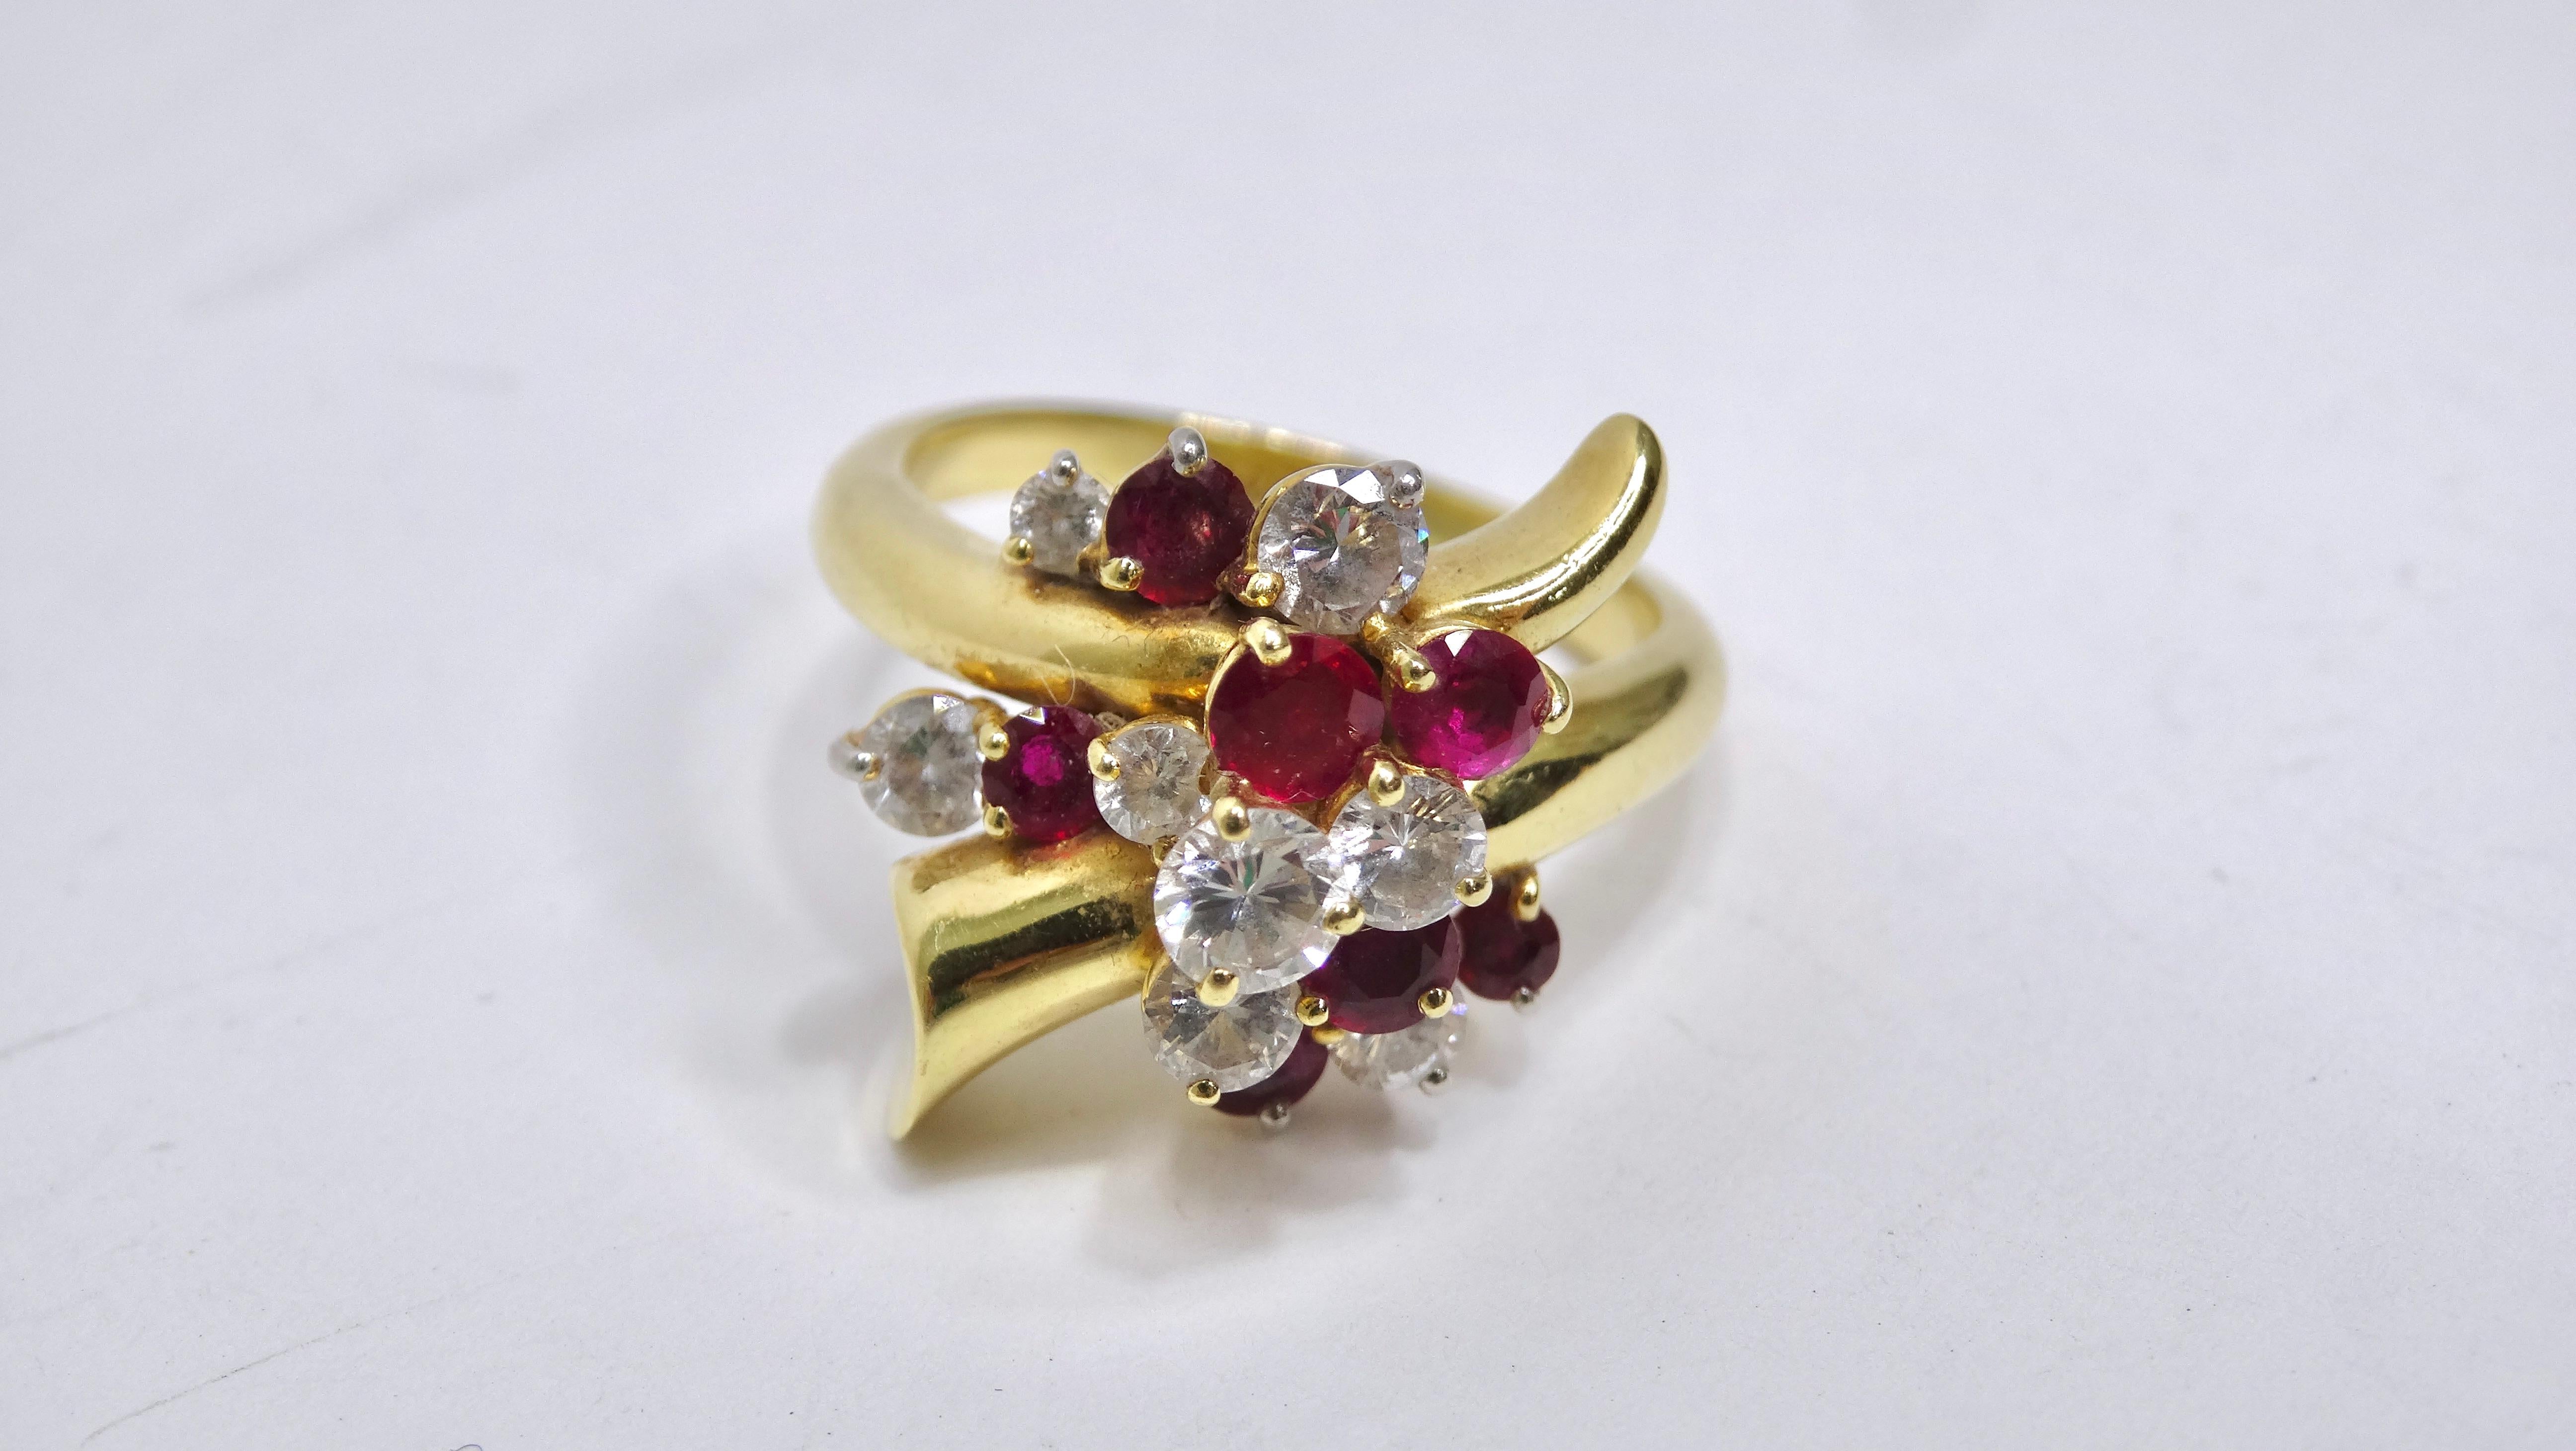 This ring is eye-candy! The sparkle and detail will have you drooling. There is something so effortless about a clustered ring. This ring features a yellow 18k gold wrapped band that still has a bright and bold color. There are seven ruby round-cut